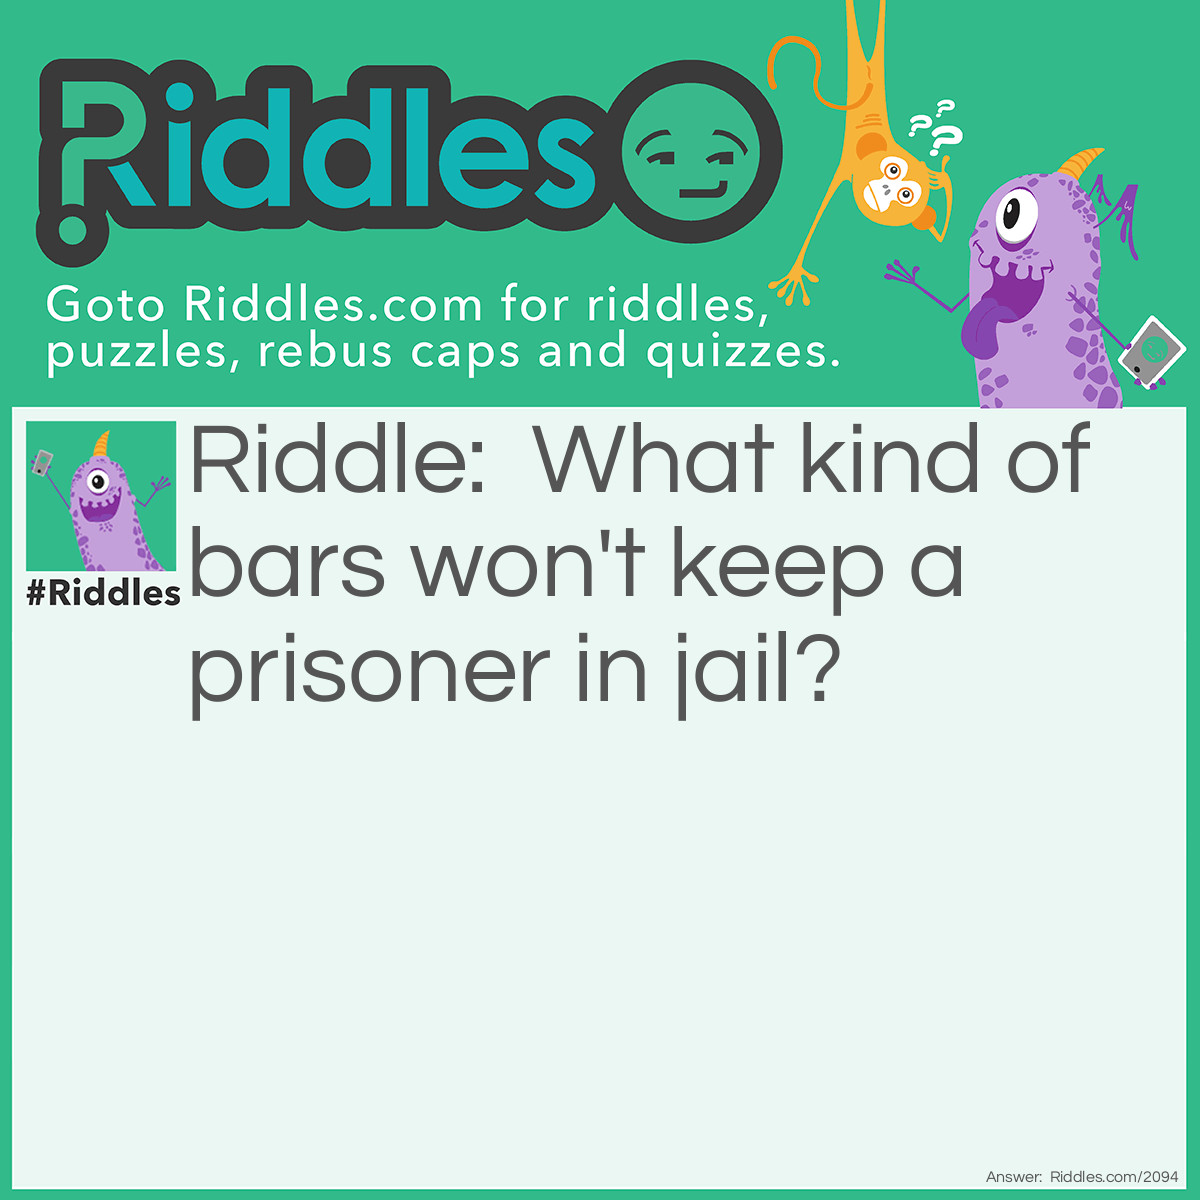 Riddle: What kind of bars won't keep a prisoner in jail? Answer: Chocolate bars.